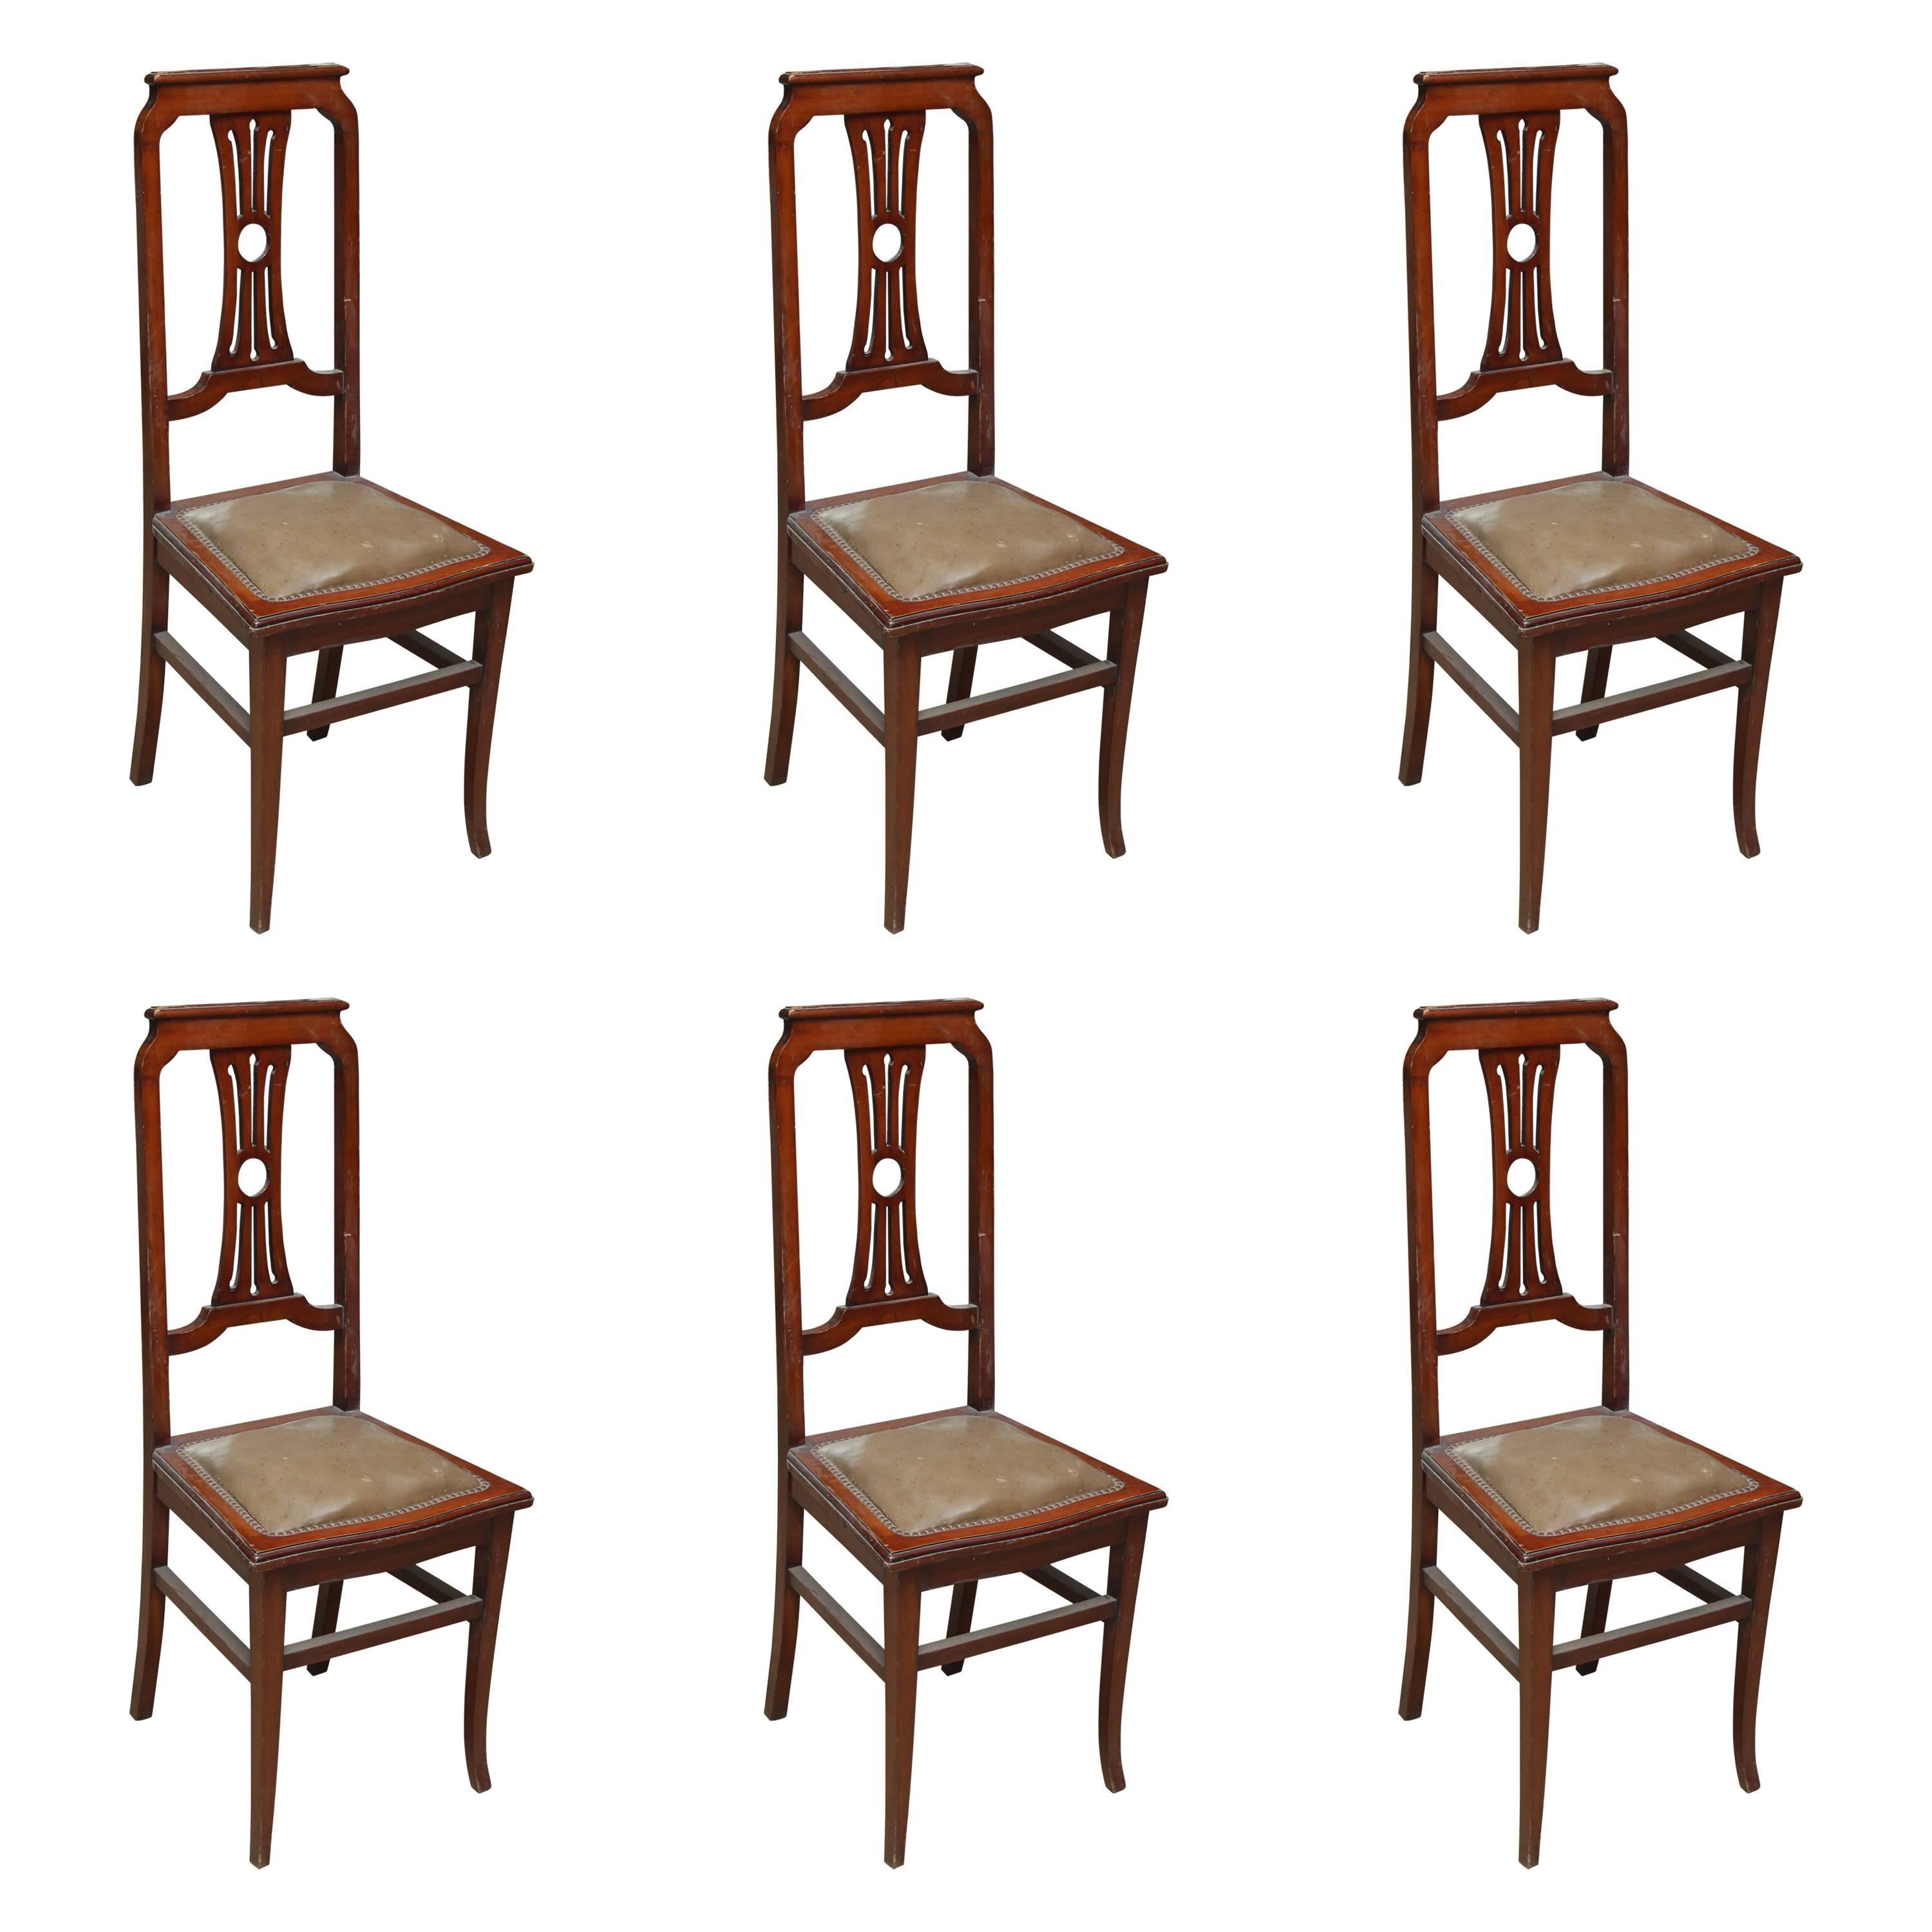 1940s Set of French Tall Lyre Back Carved Wood Dining Chairs with Leather Seat